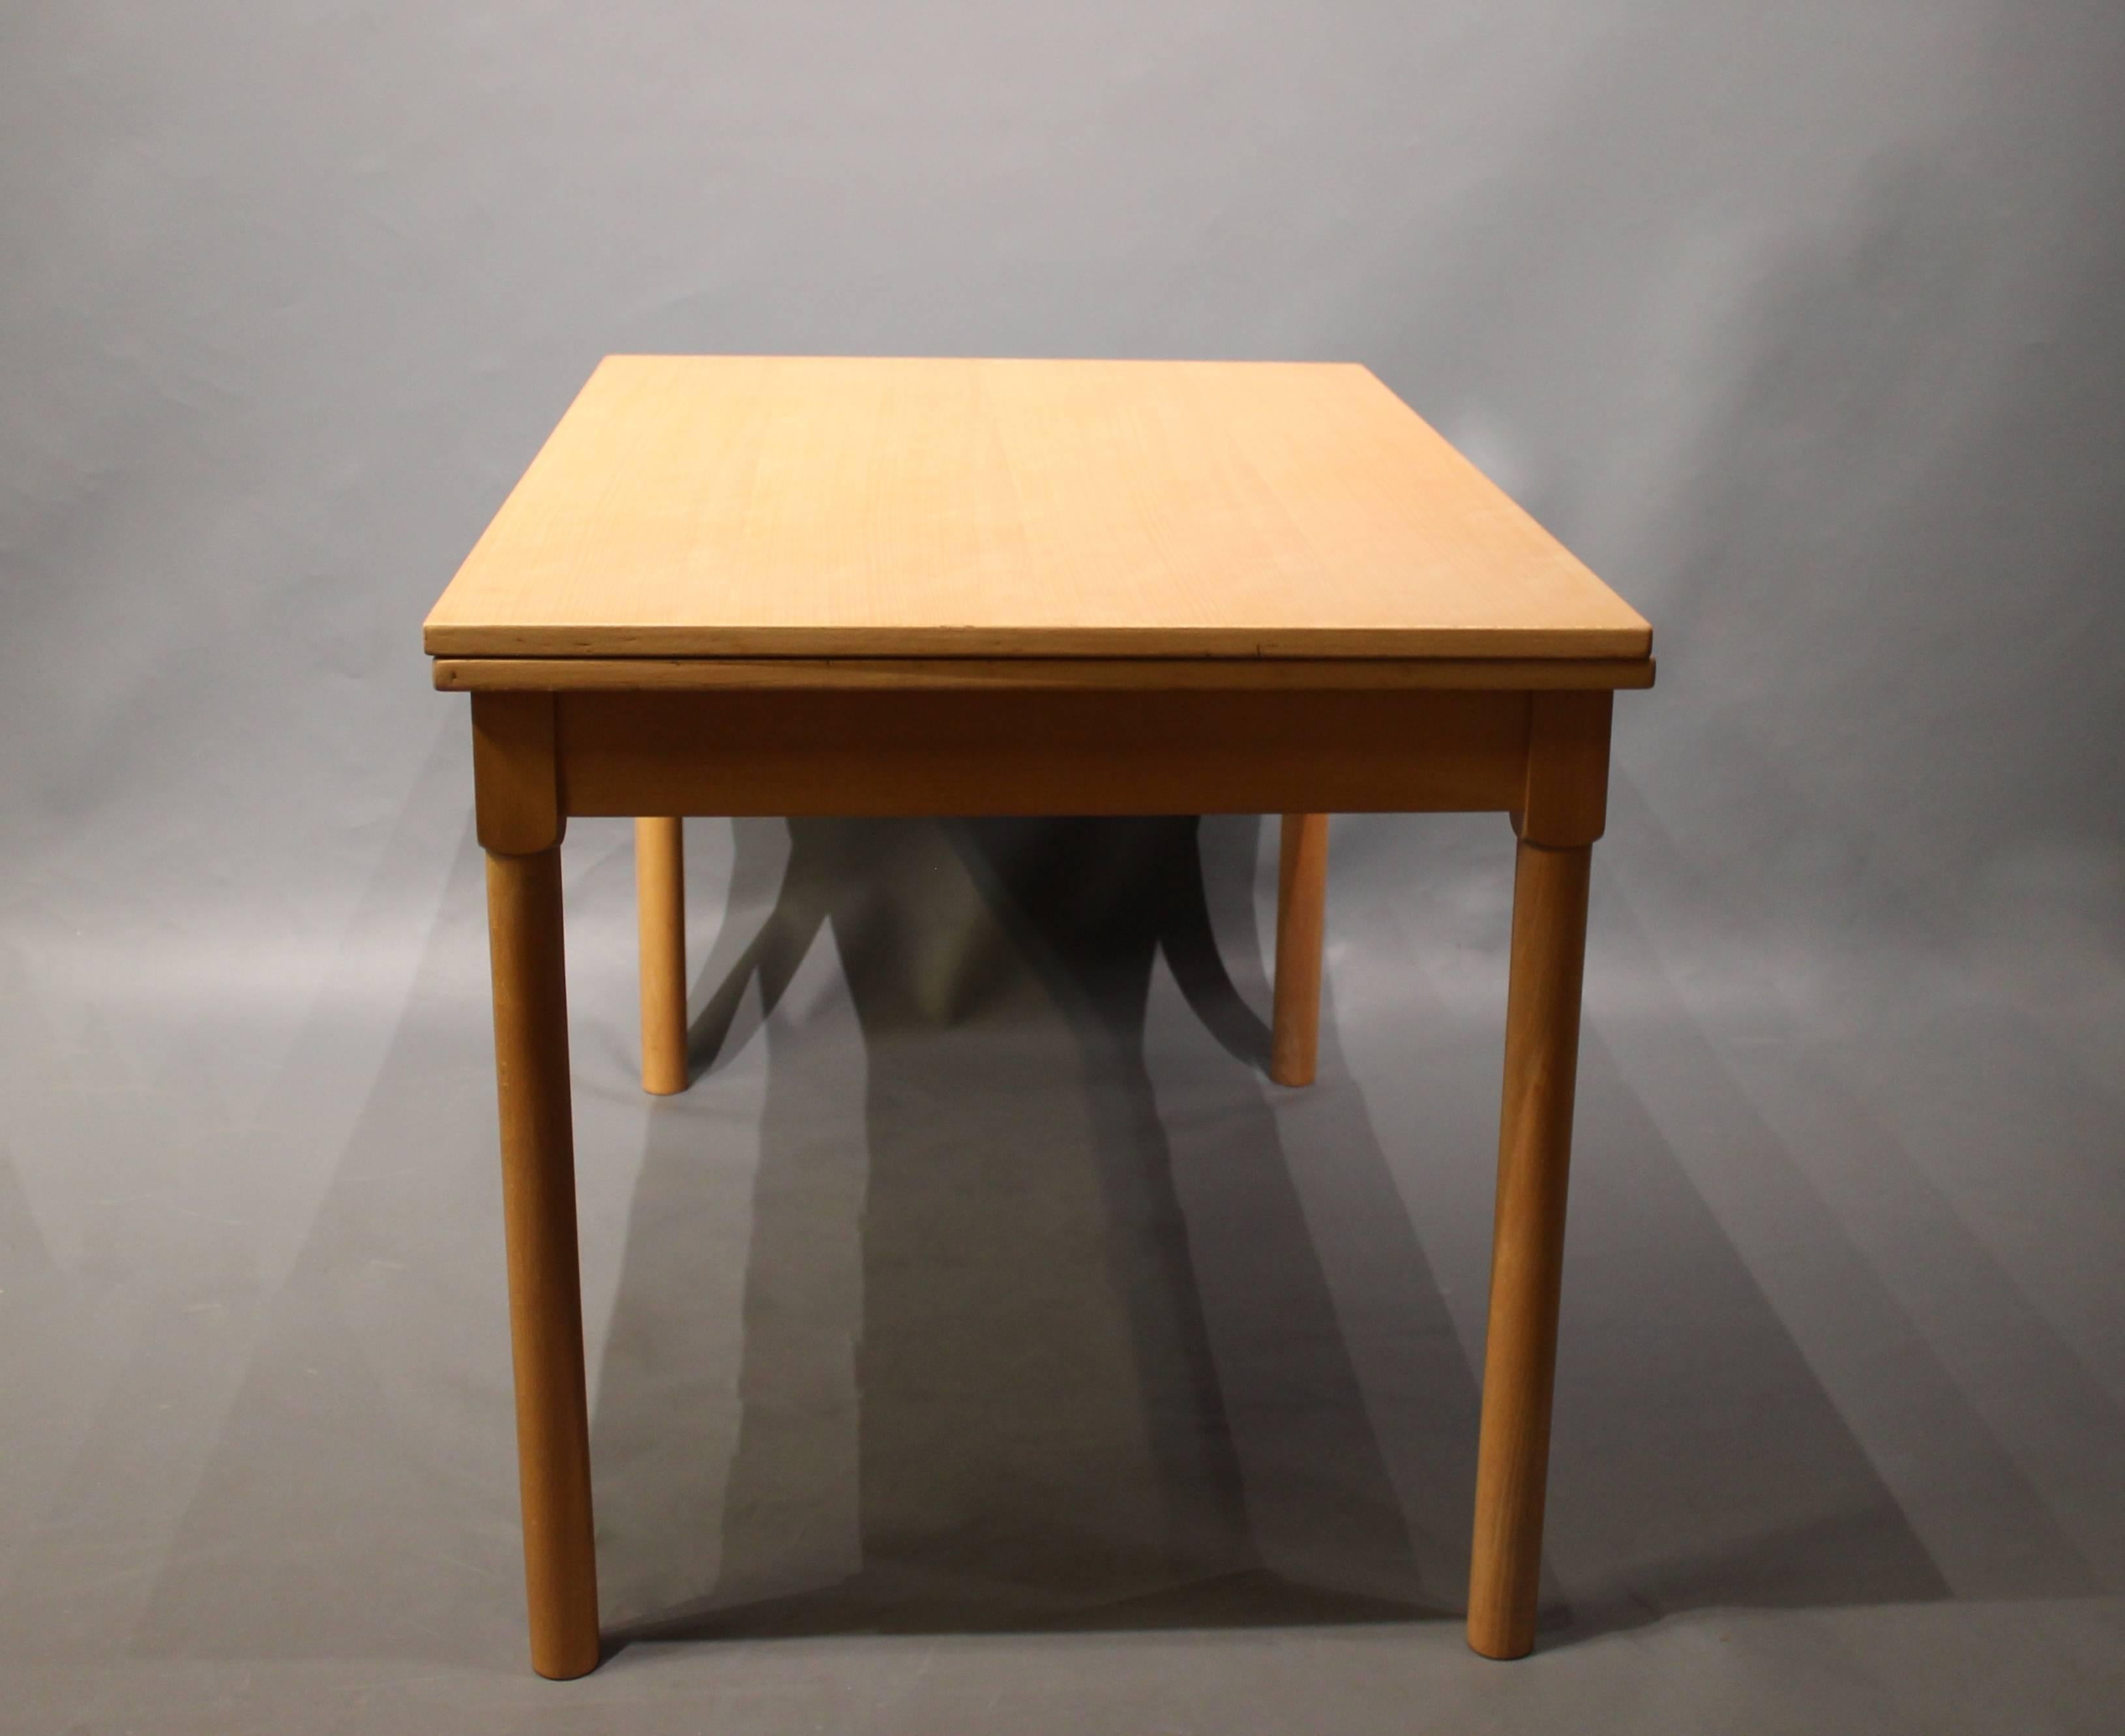 Folding table, model 4500, in beech designed by Børge Mogensen and manufactured by Fritz Hansen in 1982.